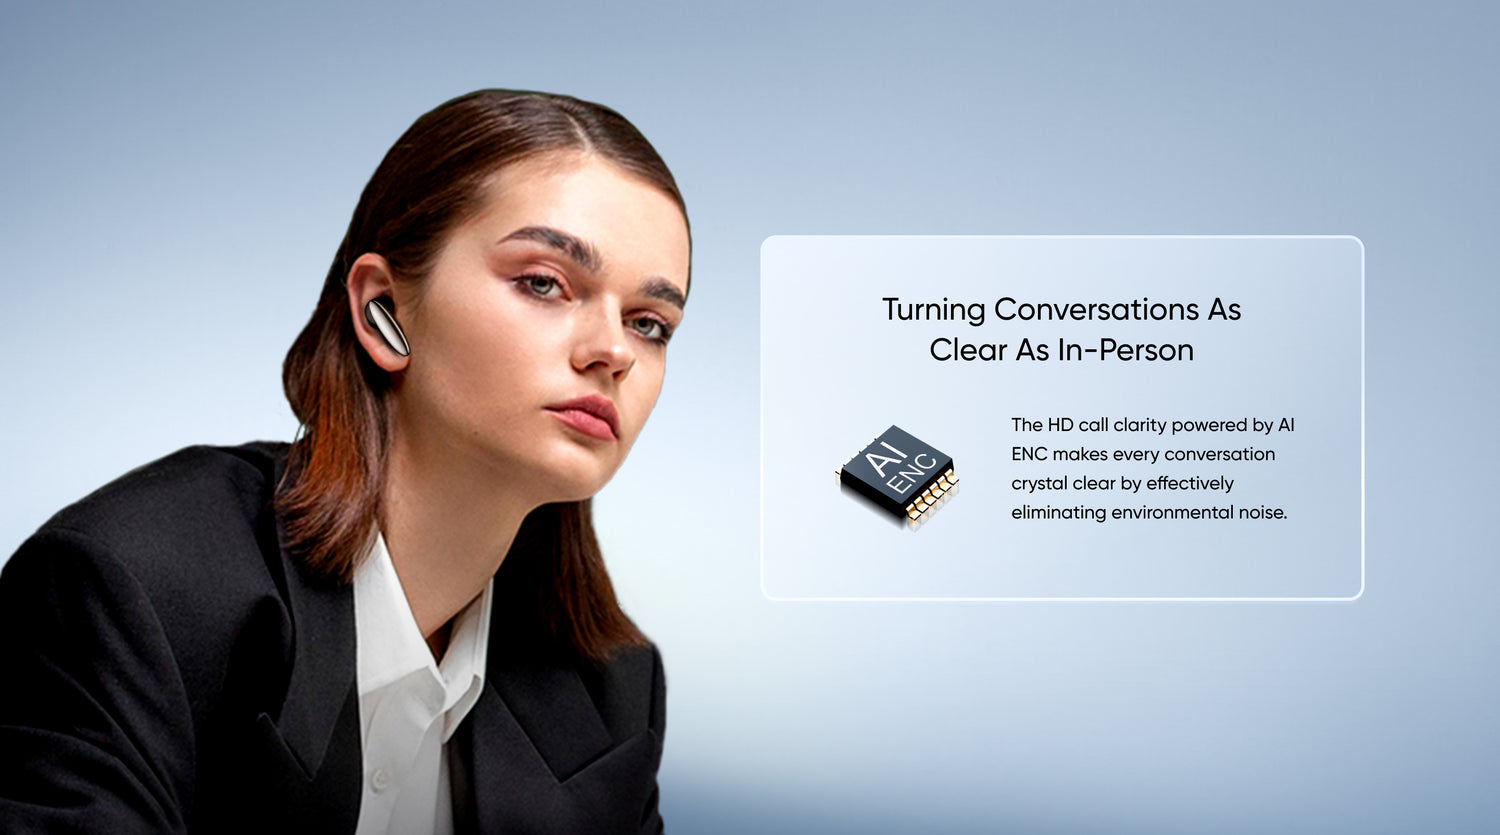 Turning Conversations as Clear as In-Person

The HD call clarity powered by AI ENC makes every conversation crystal clear by effectively eliminating environmental noise.